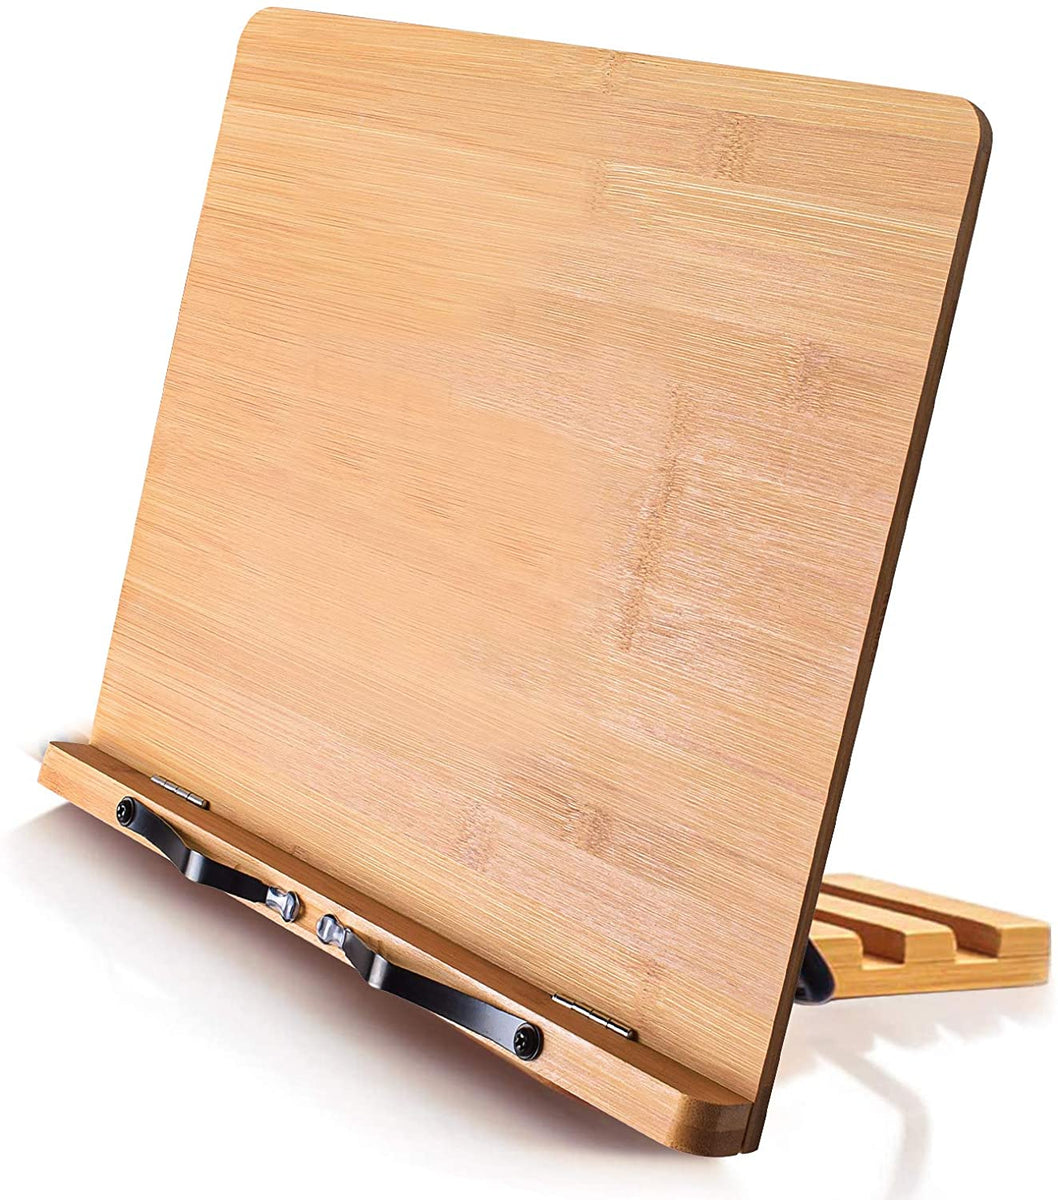 Dropship Renewable Bamboo Book Stand: Simple Log Texture Desk Decor For  Office & School Storage to Sell Online at a Lower Price